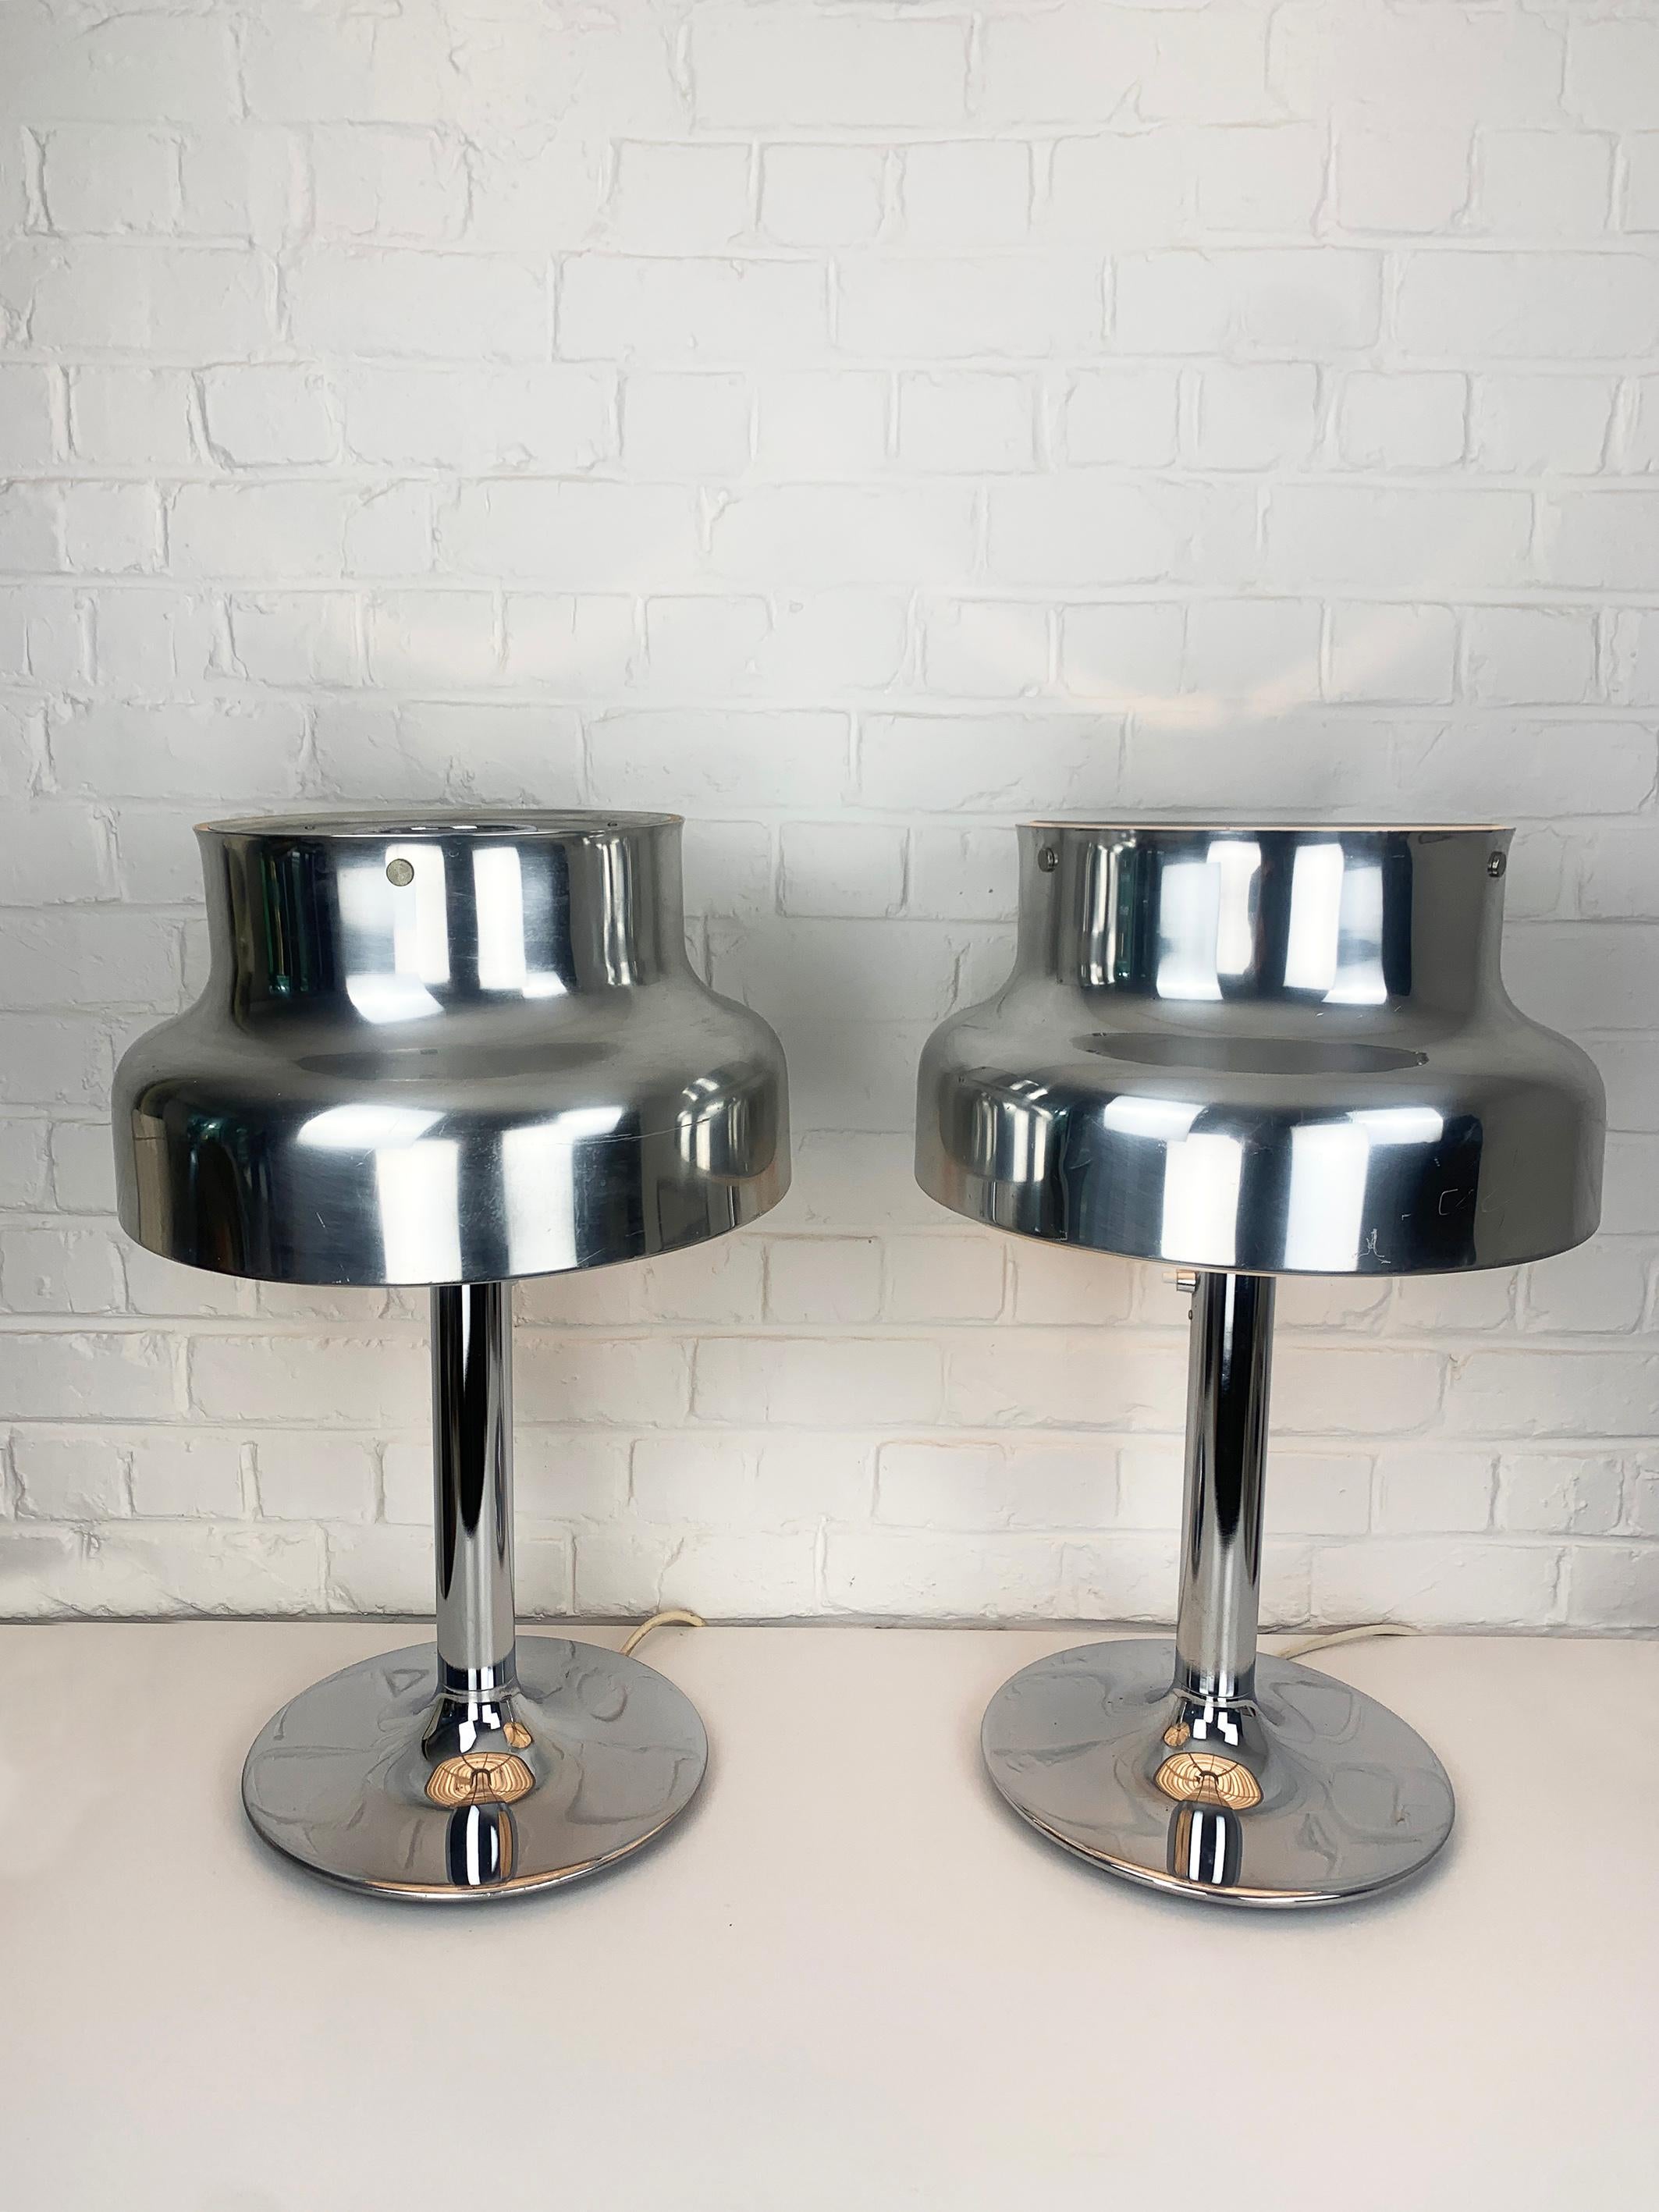 Rare pair of the quite impressive Bumling table lamps in aluminium/chrome finish. Both lamps are labeled. 

The Bumling lamp series was designed by Anders Pehrson for Ateljé Lyktan in Åhus, Sweden end of the 1960s. 

Anders Pehrson was born in 1912